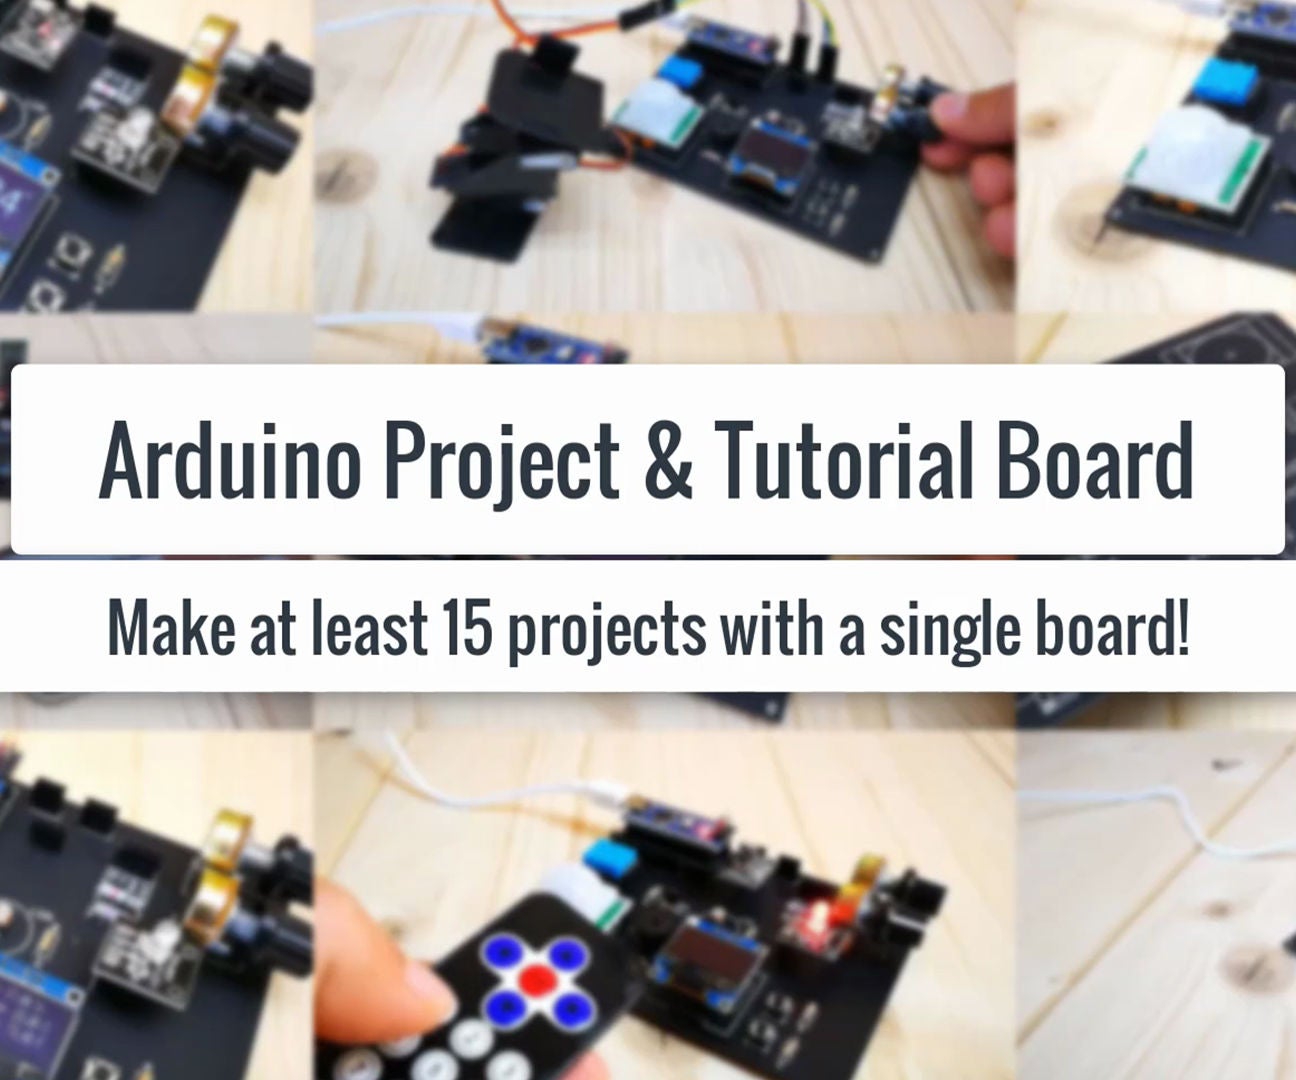 10 Basic Arduino Projects for Beginners! Make at Least 15 Projects With a Single Board!